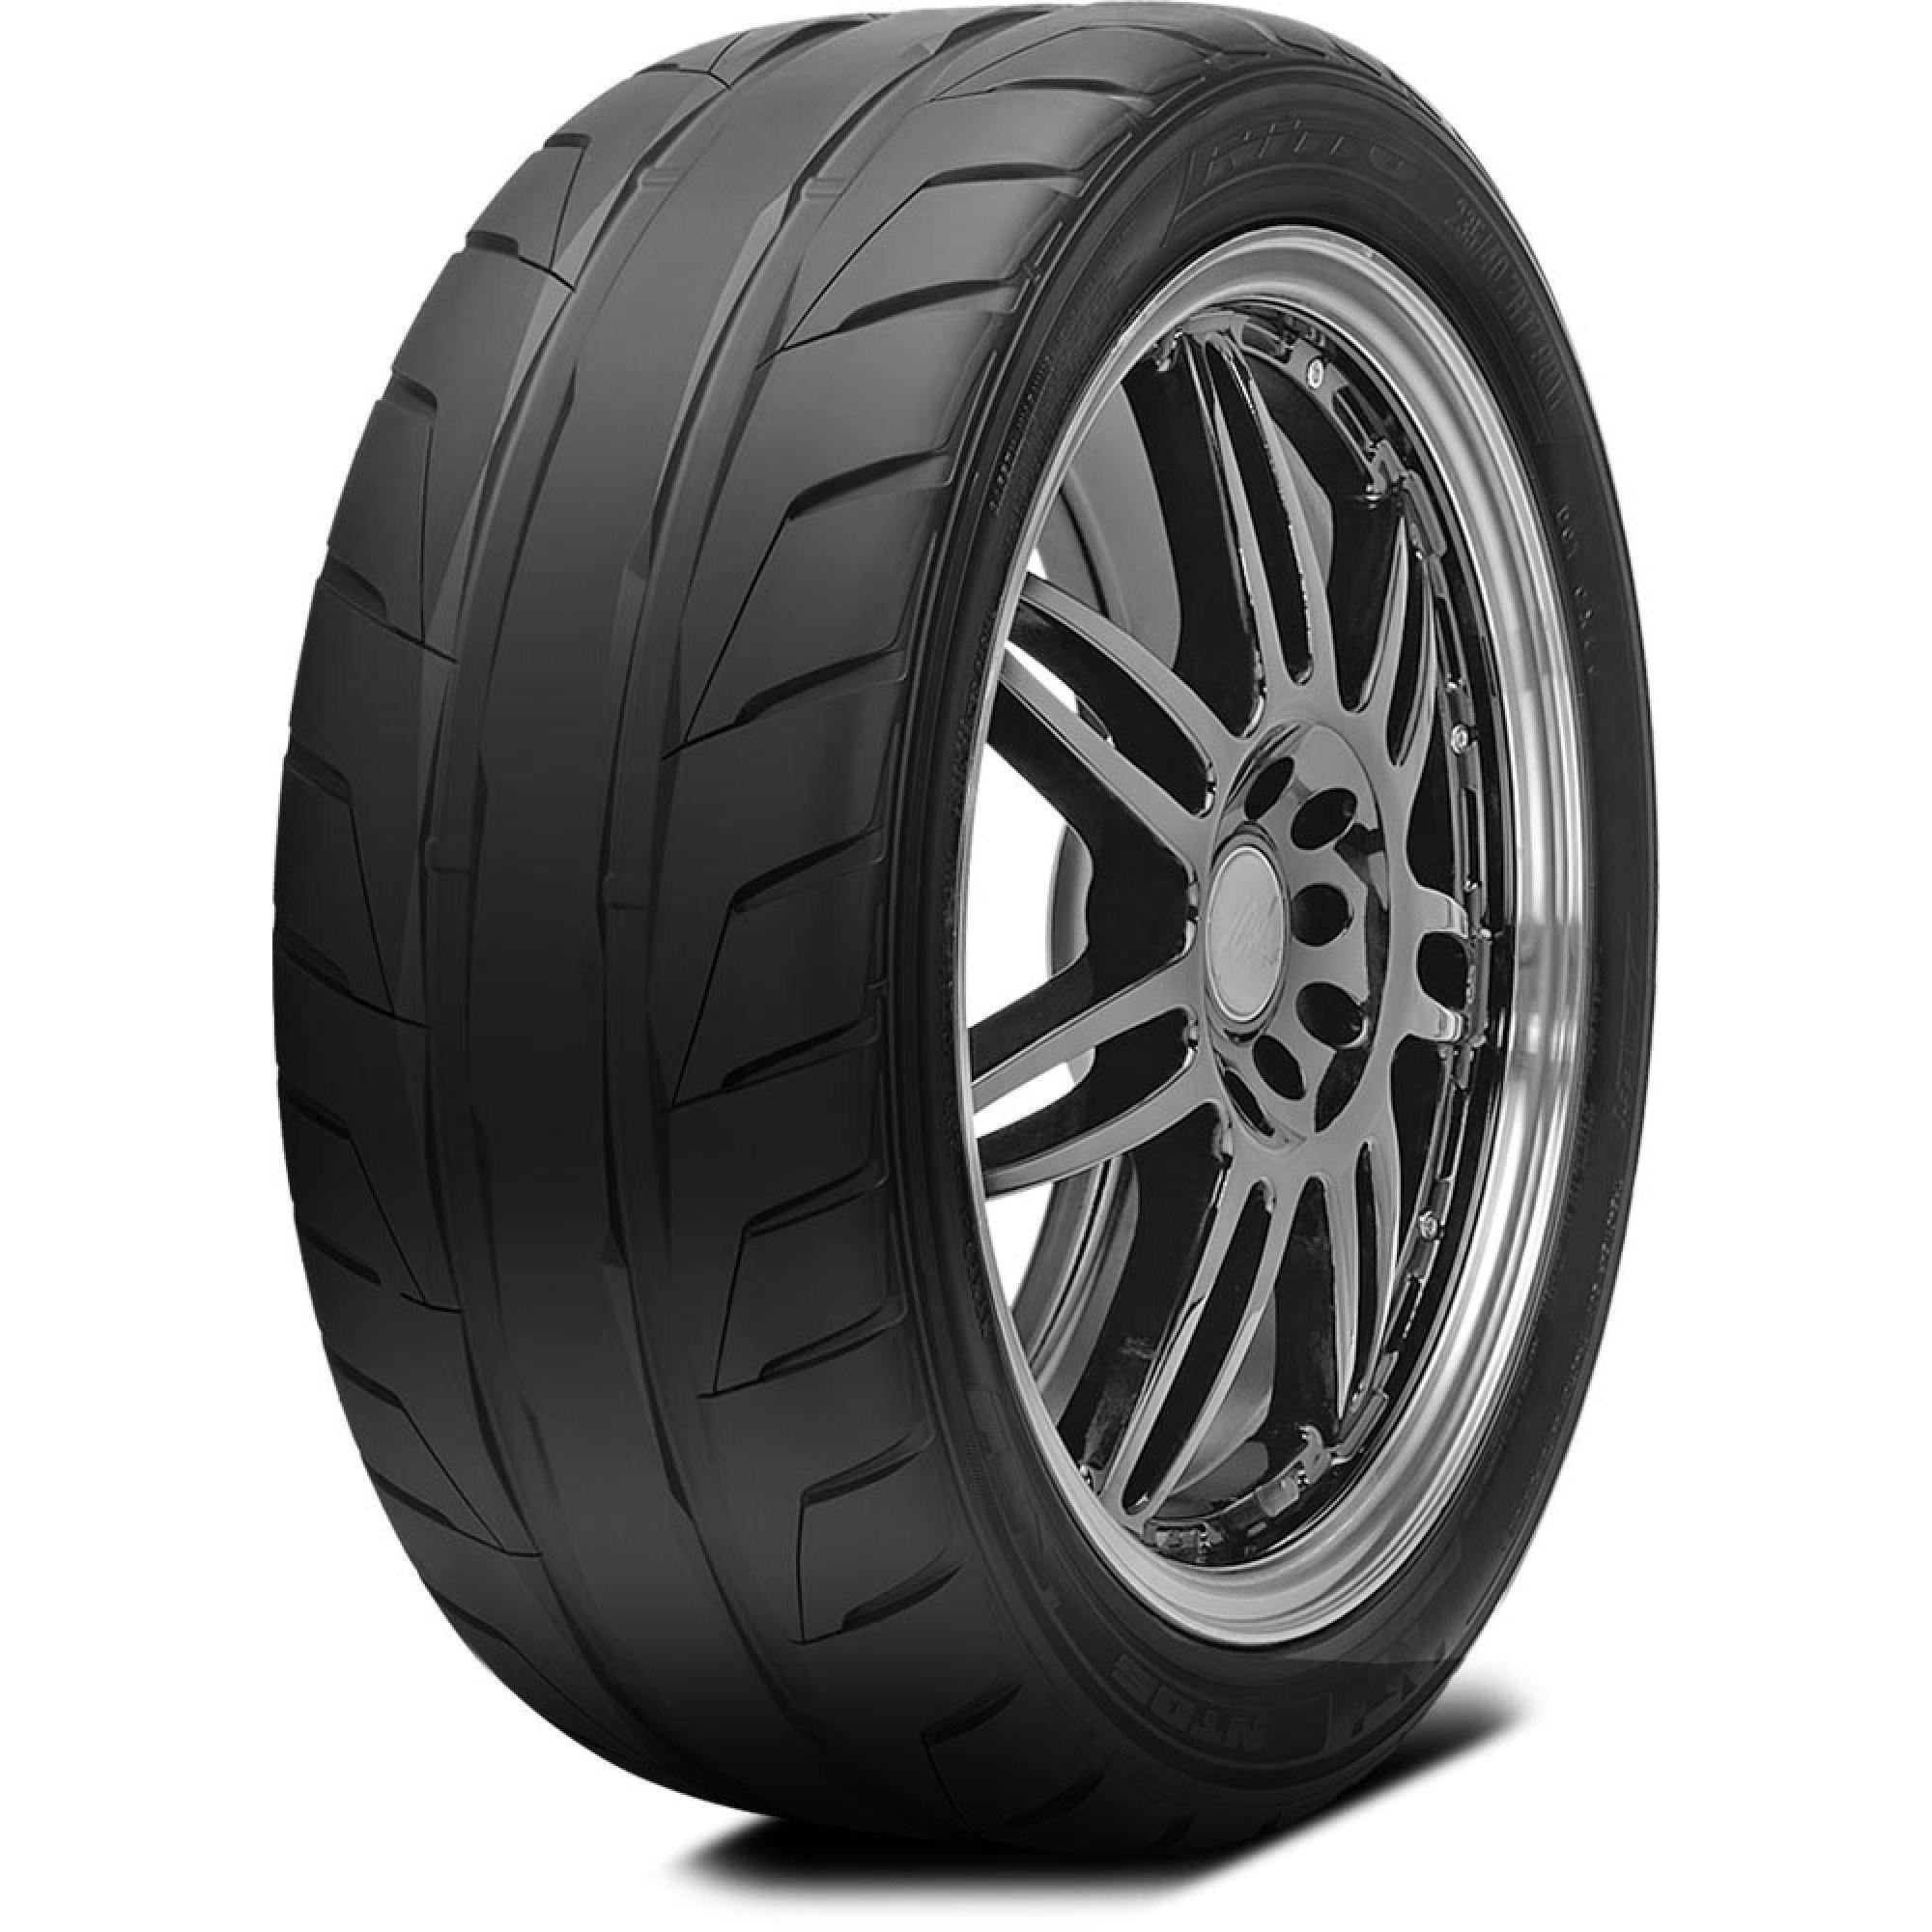 265/35ZR18 97W NITTO NT-05 SUMMER TIRES